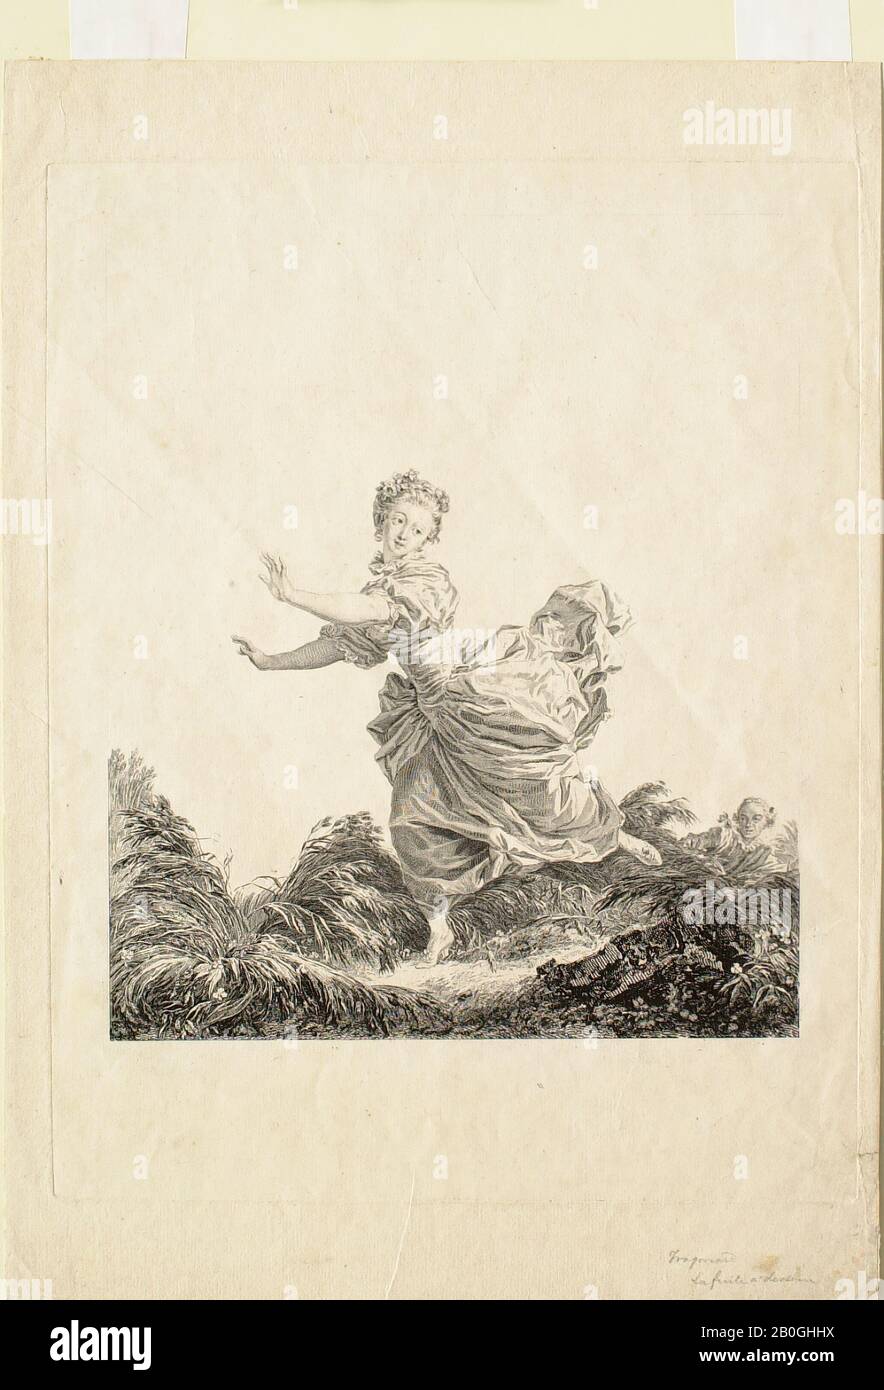 Jacques Couché, French, 1759–after 1808, After Jean-Honoré Fragonard, (French, 1732–1806), La fuite à dessein, 1783, Etching on laid paper, image: 11 1/2 x 9 5/8 in. (29.2 x 24.5 cm Stock Photo